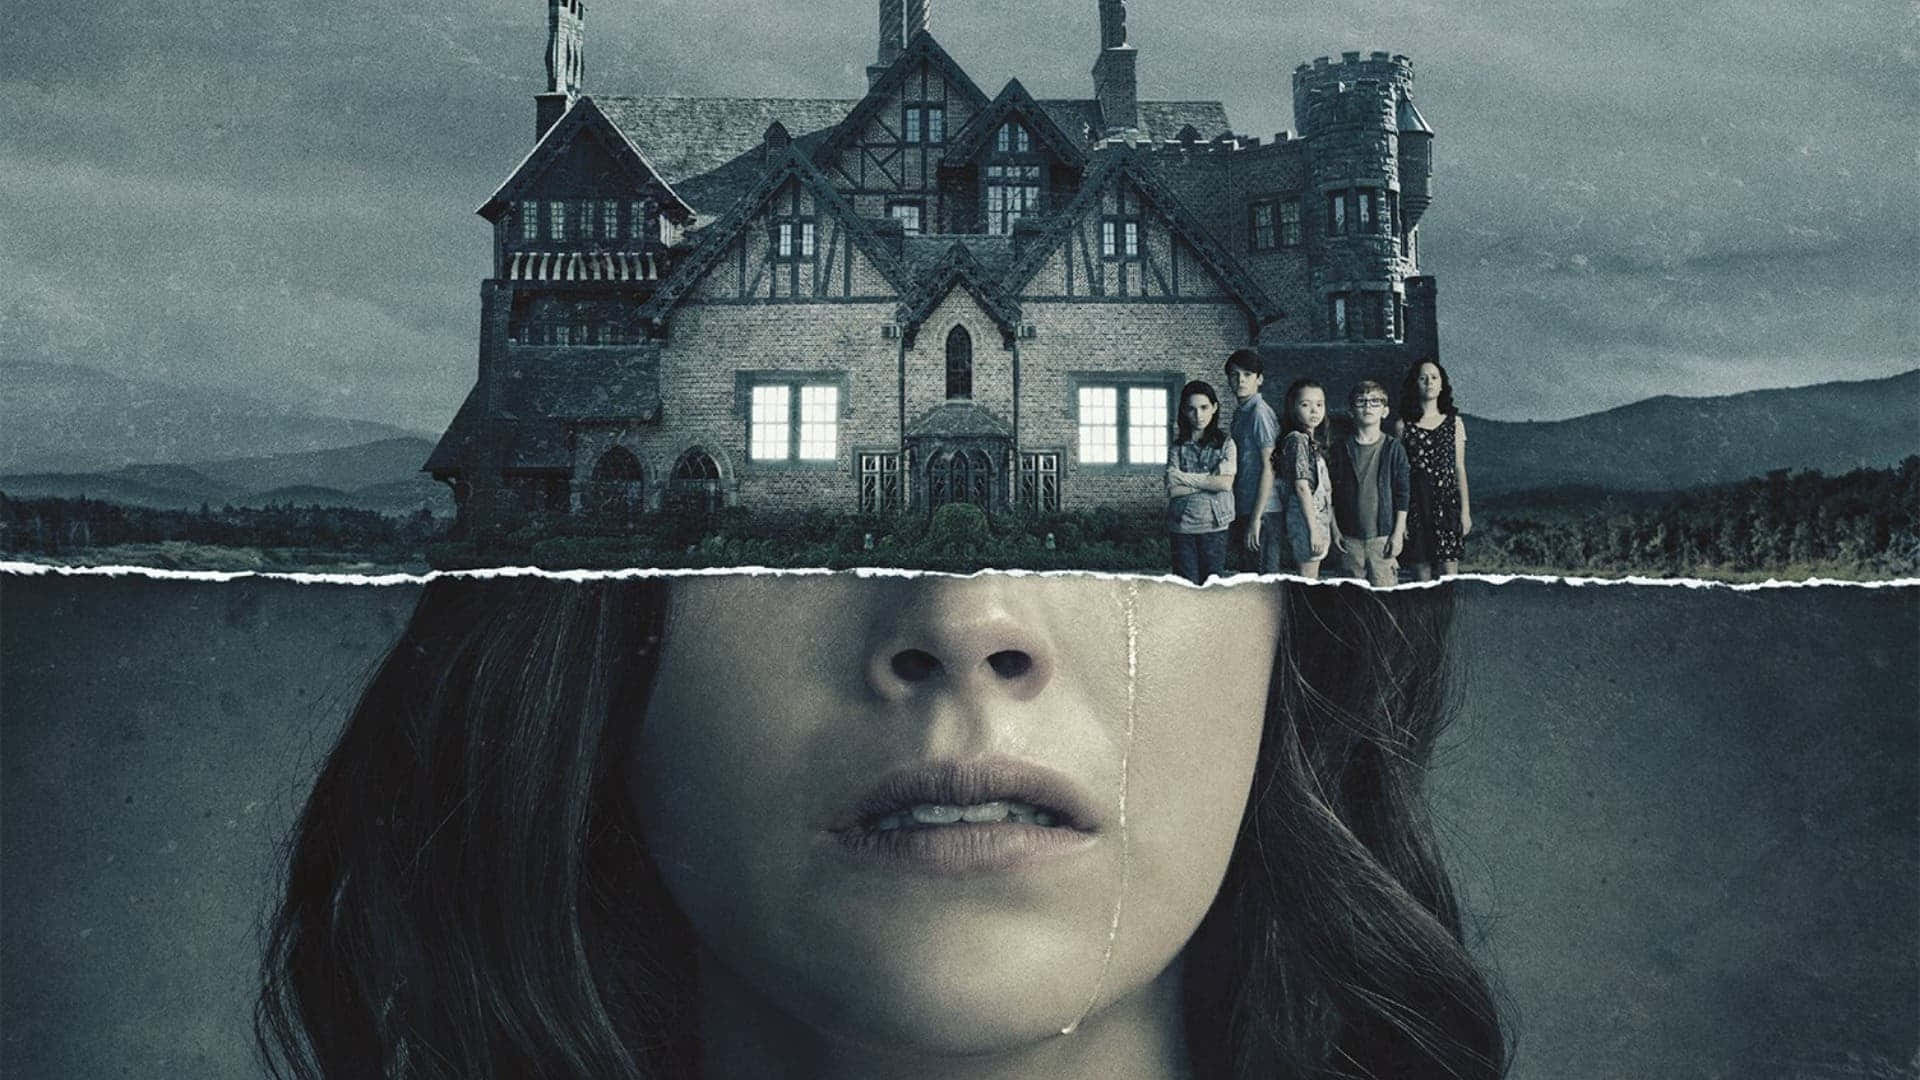 Eerie And Chilling Portrait Of The Bly Manor Amidst The Fog Wallpaper